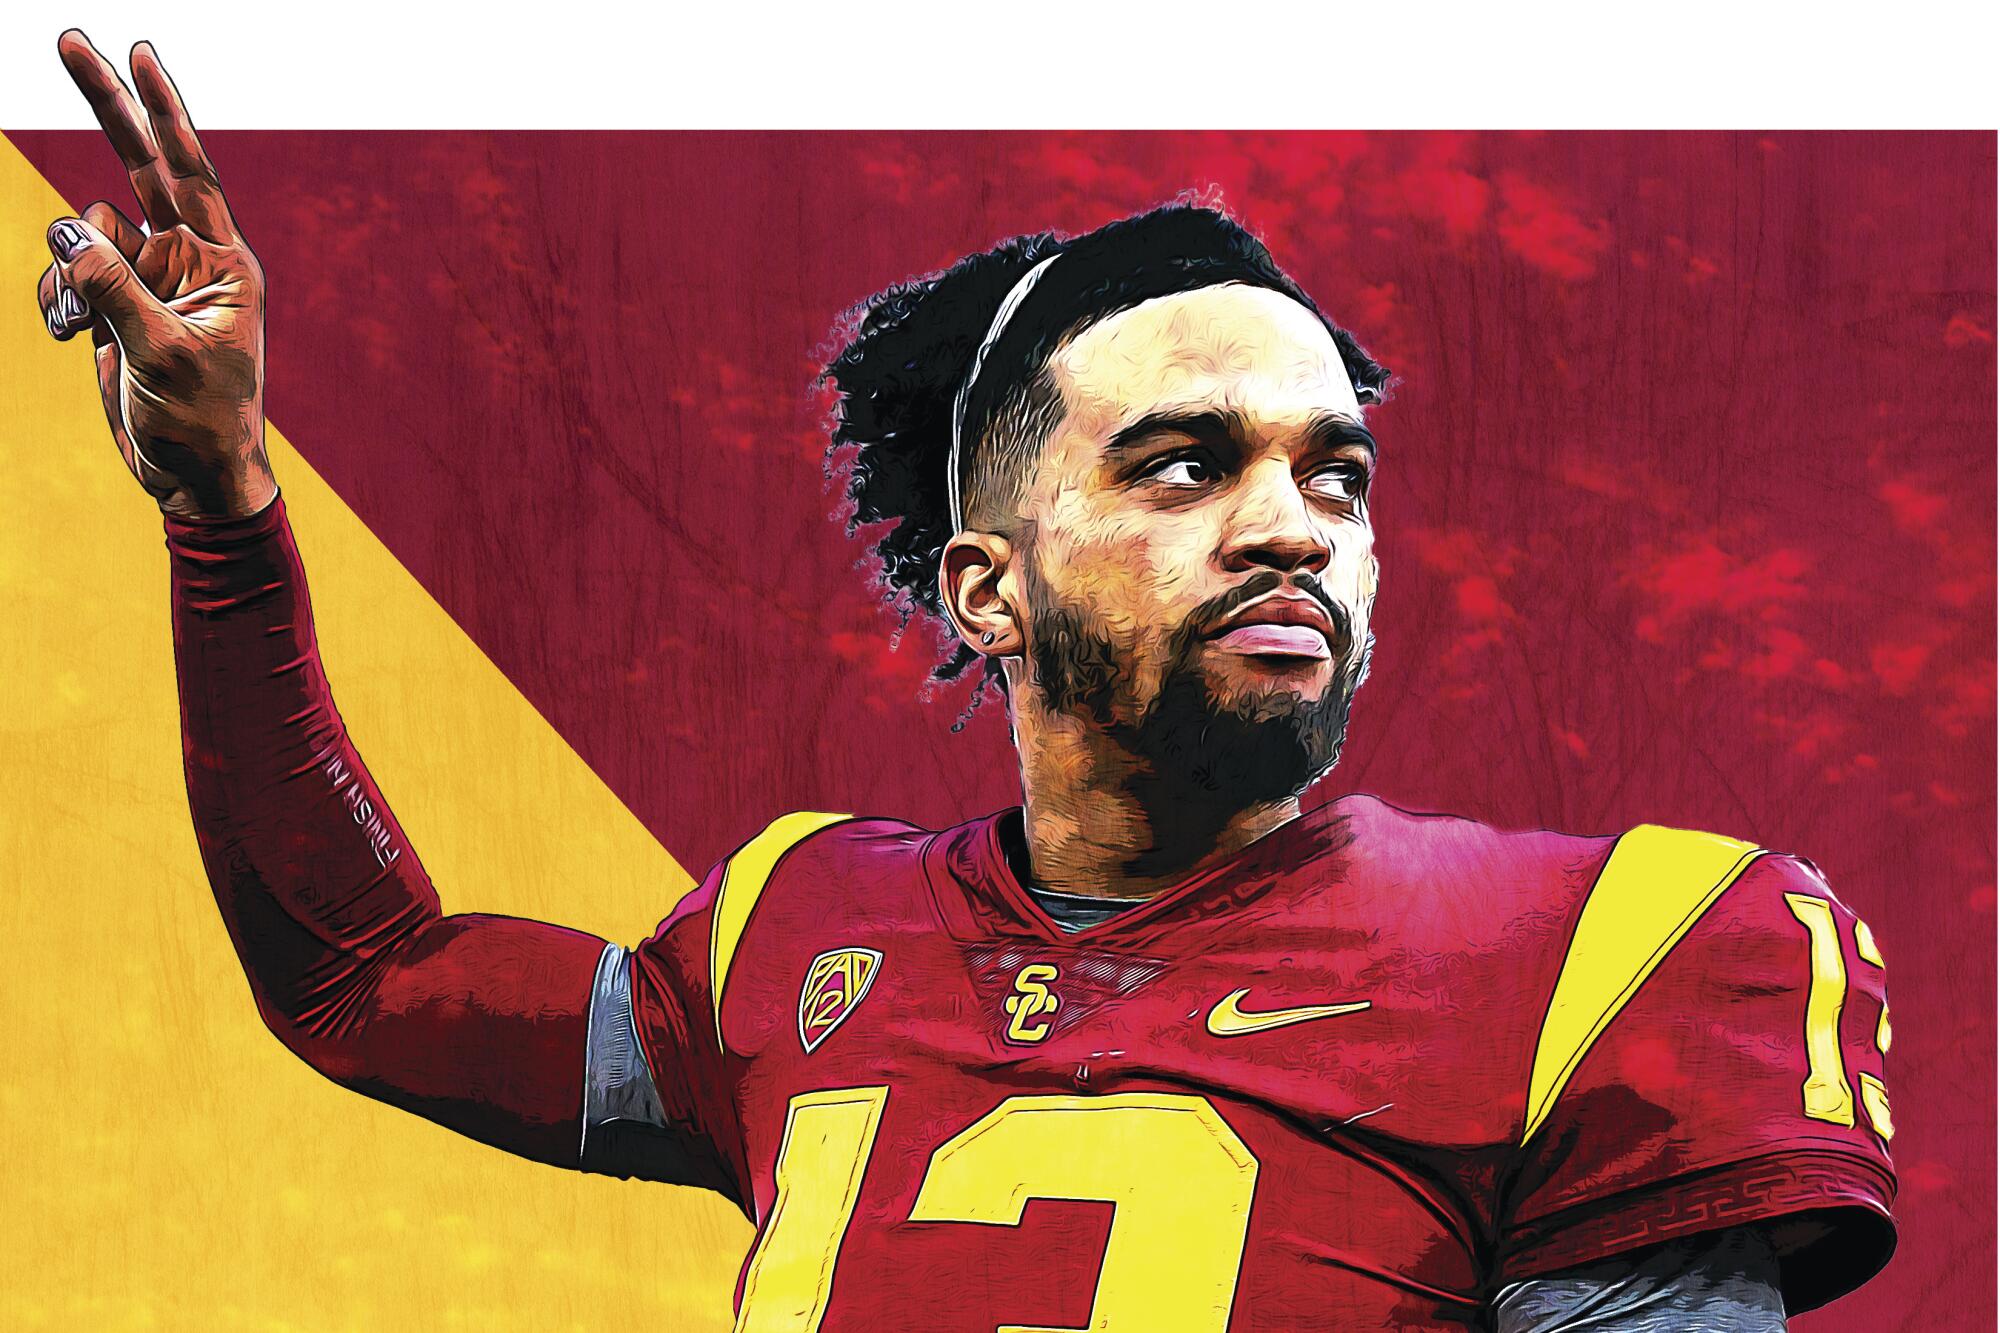 USC quarterback Caleb Williams is poised to lead the Trojans through another season after winning the Heisman Trophy.